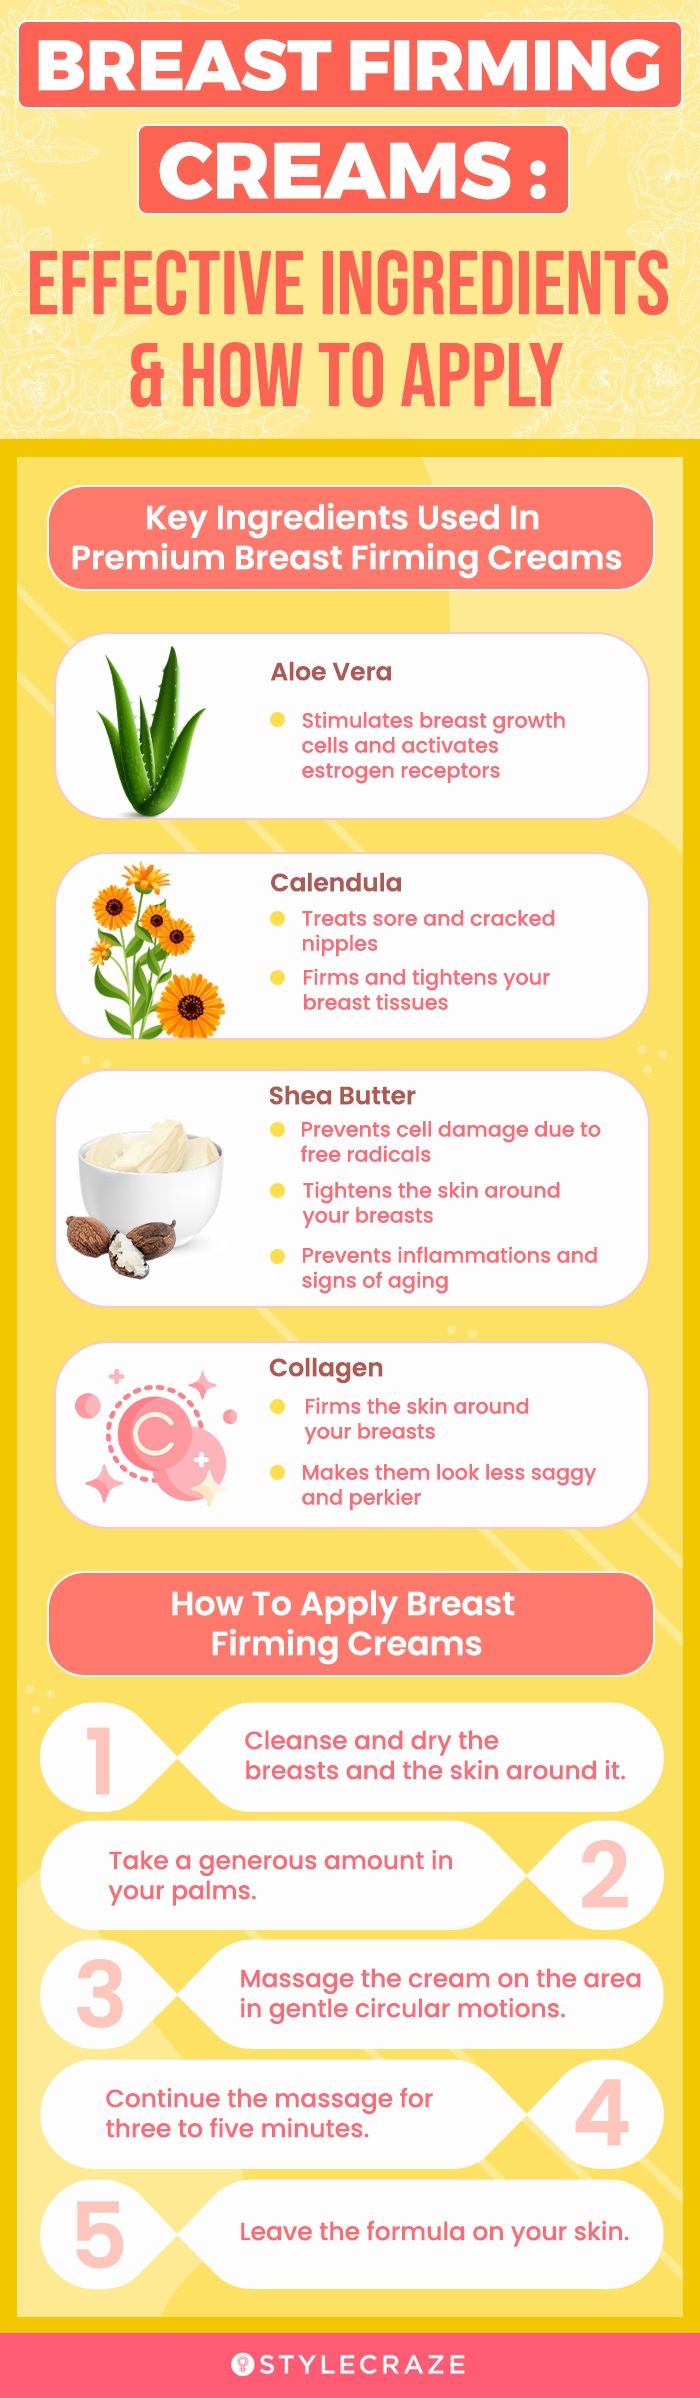 Breast Firming Creams: Effective Ingredients & How To Apply (infographic)